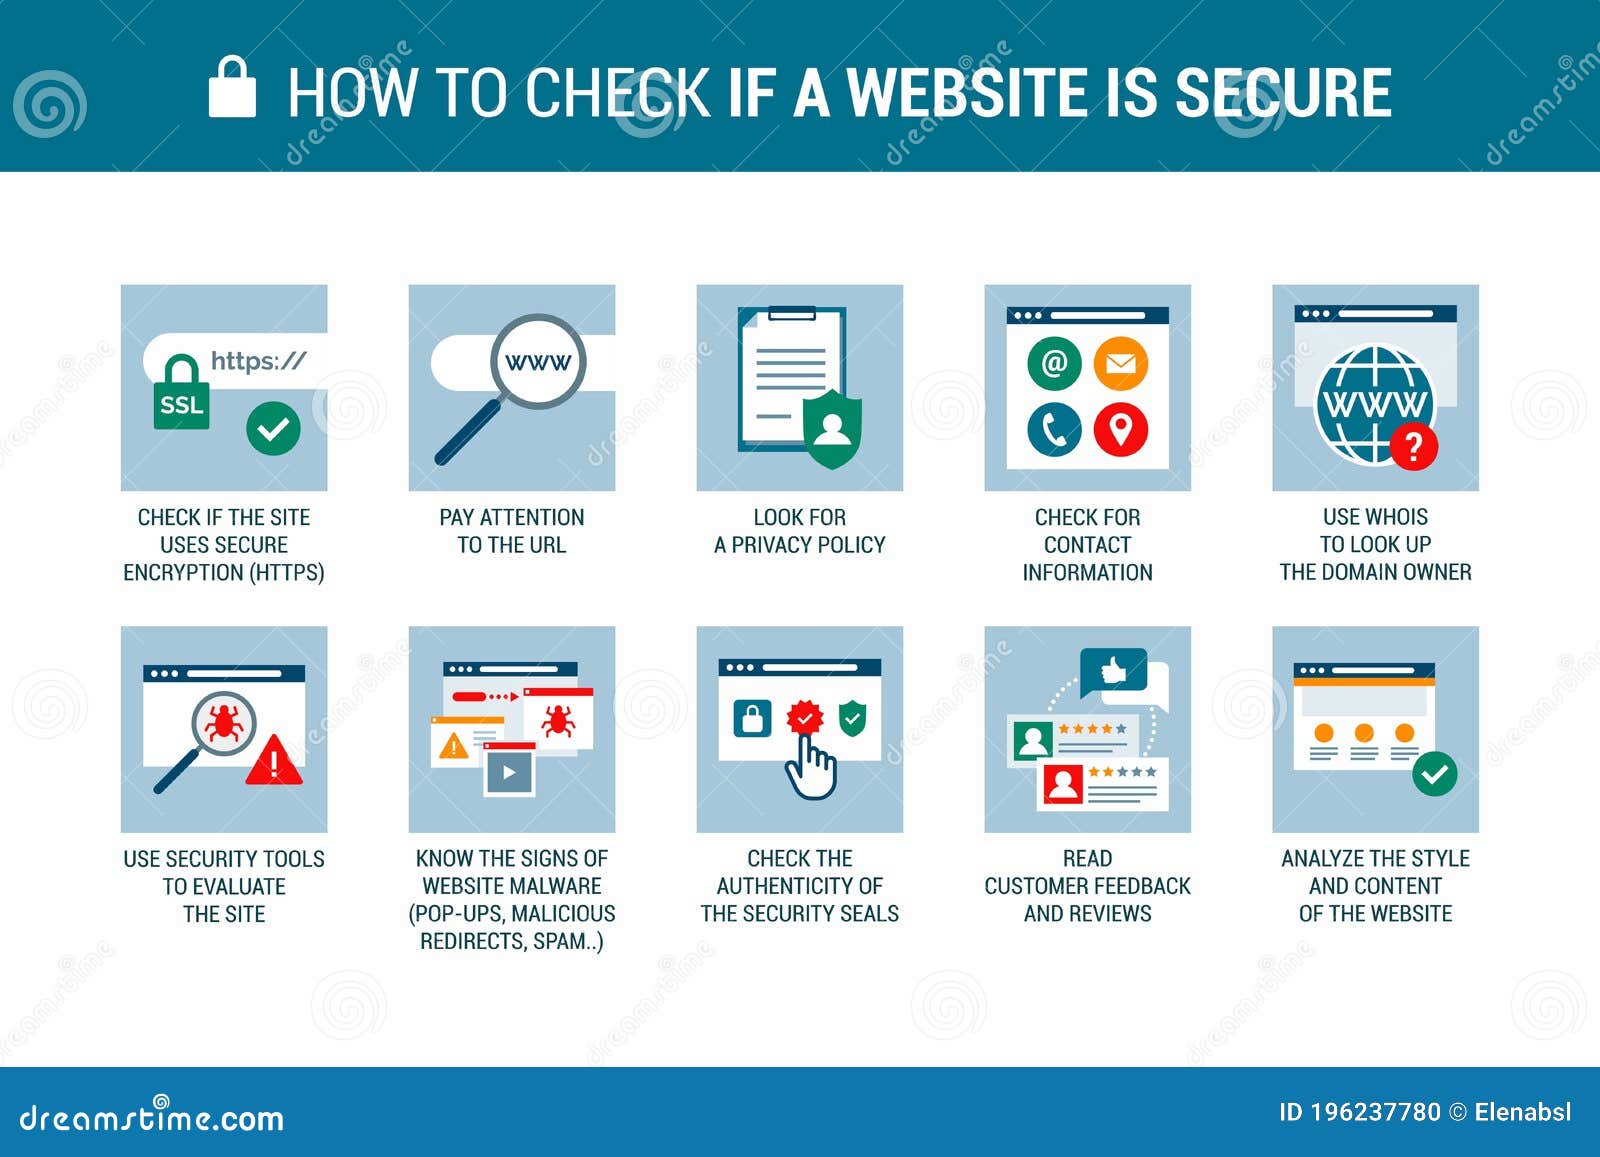 Fake Website Check: How to Check If a Website Is Safe